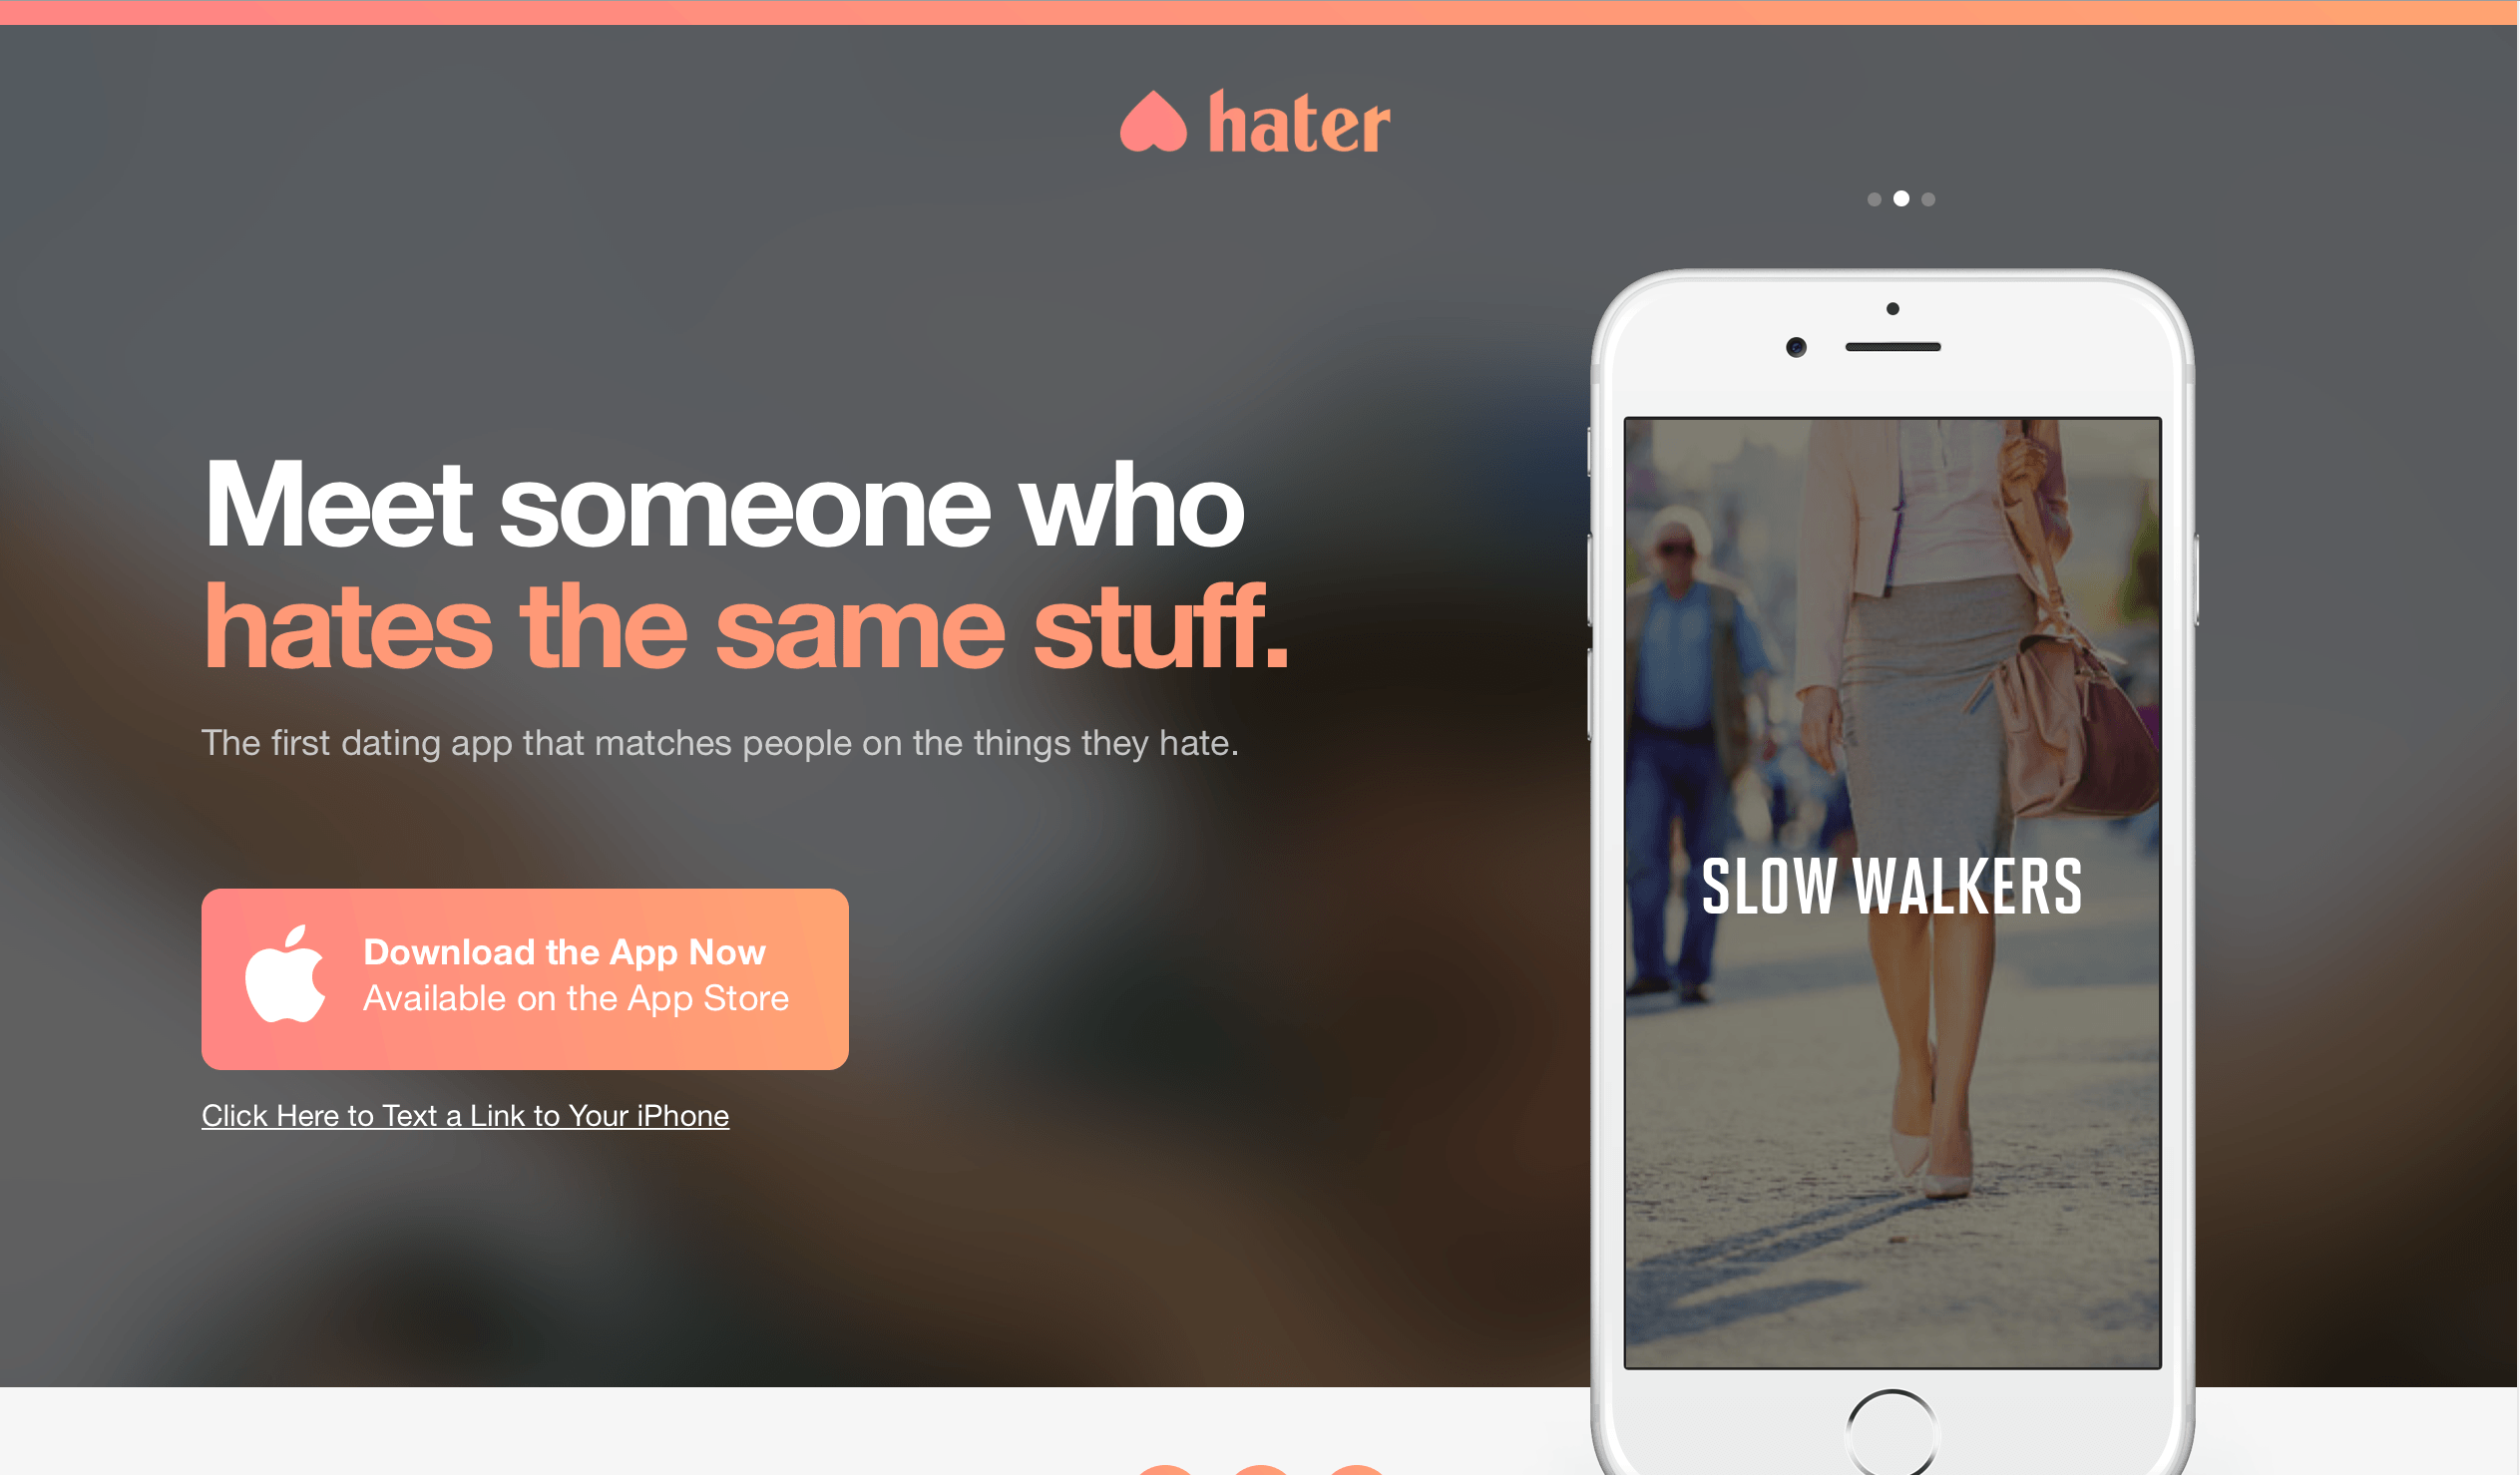 This App Tells You How Hating The Same Thing is The New Romance